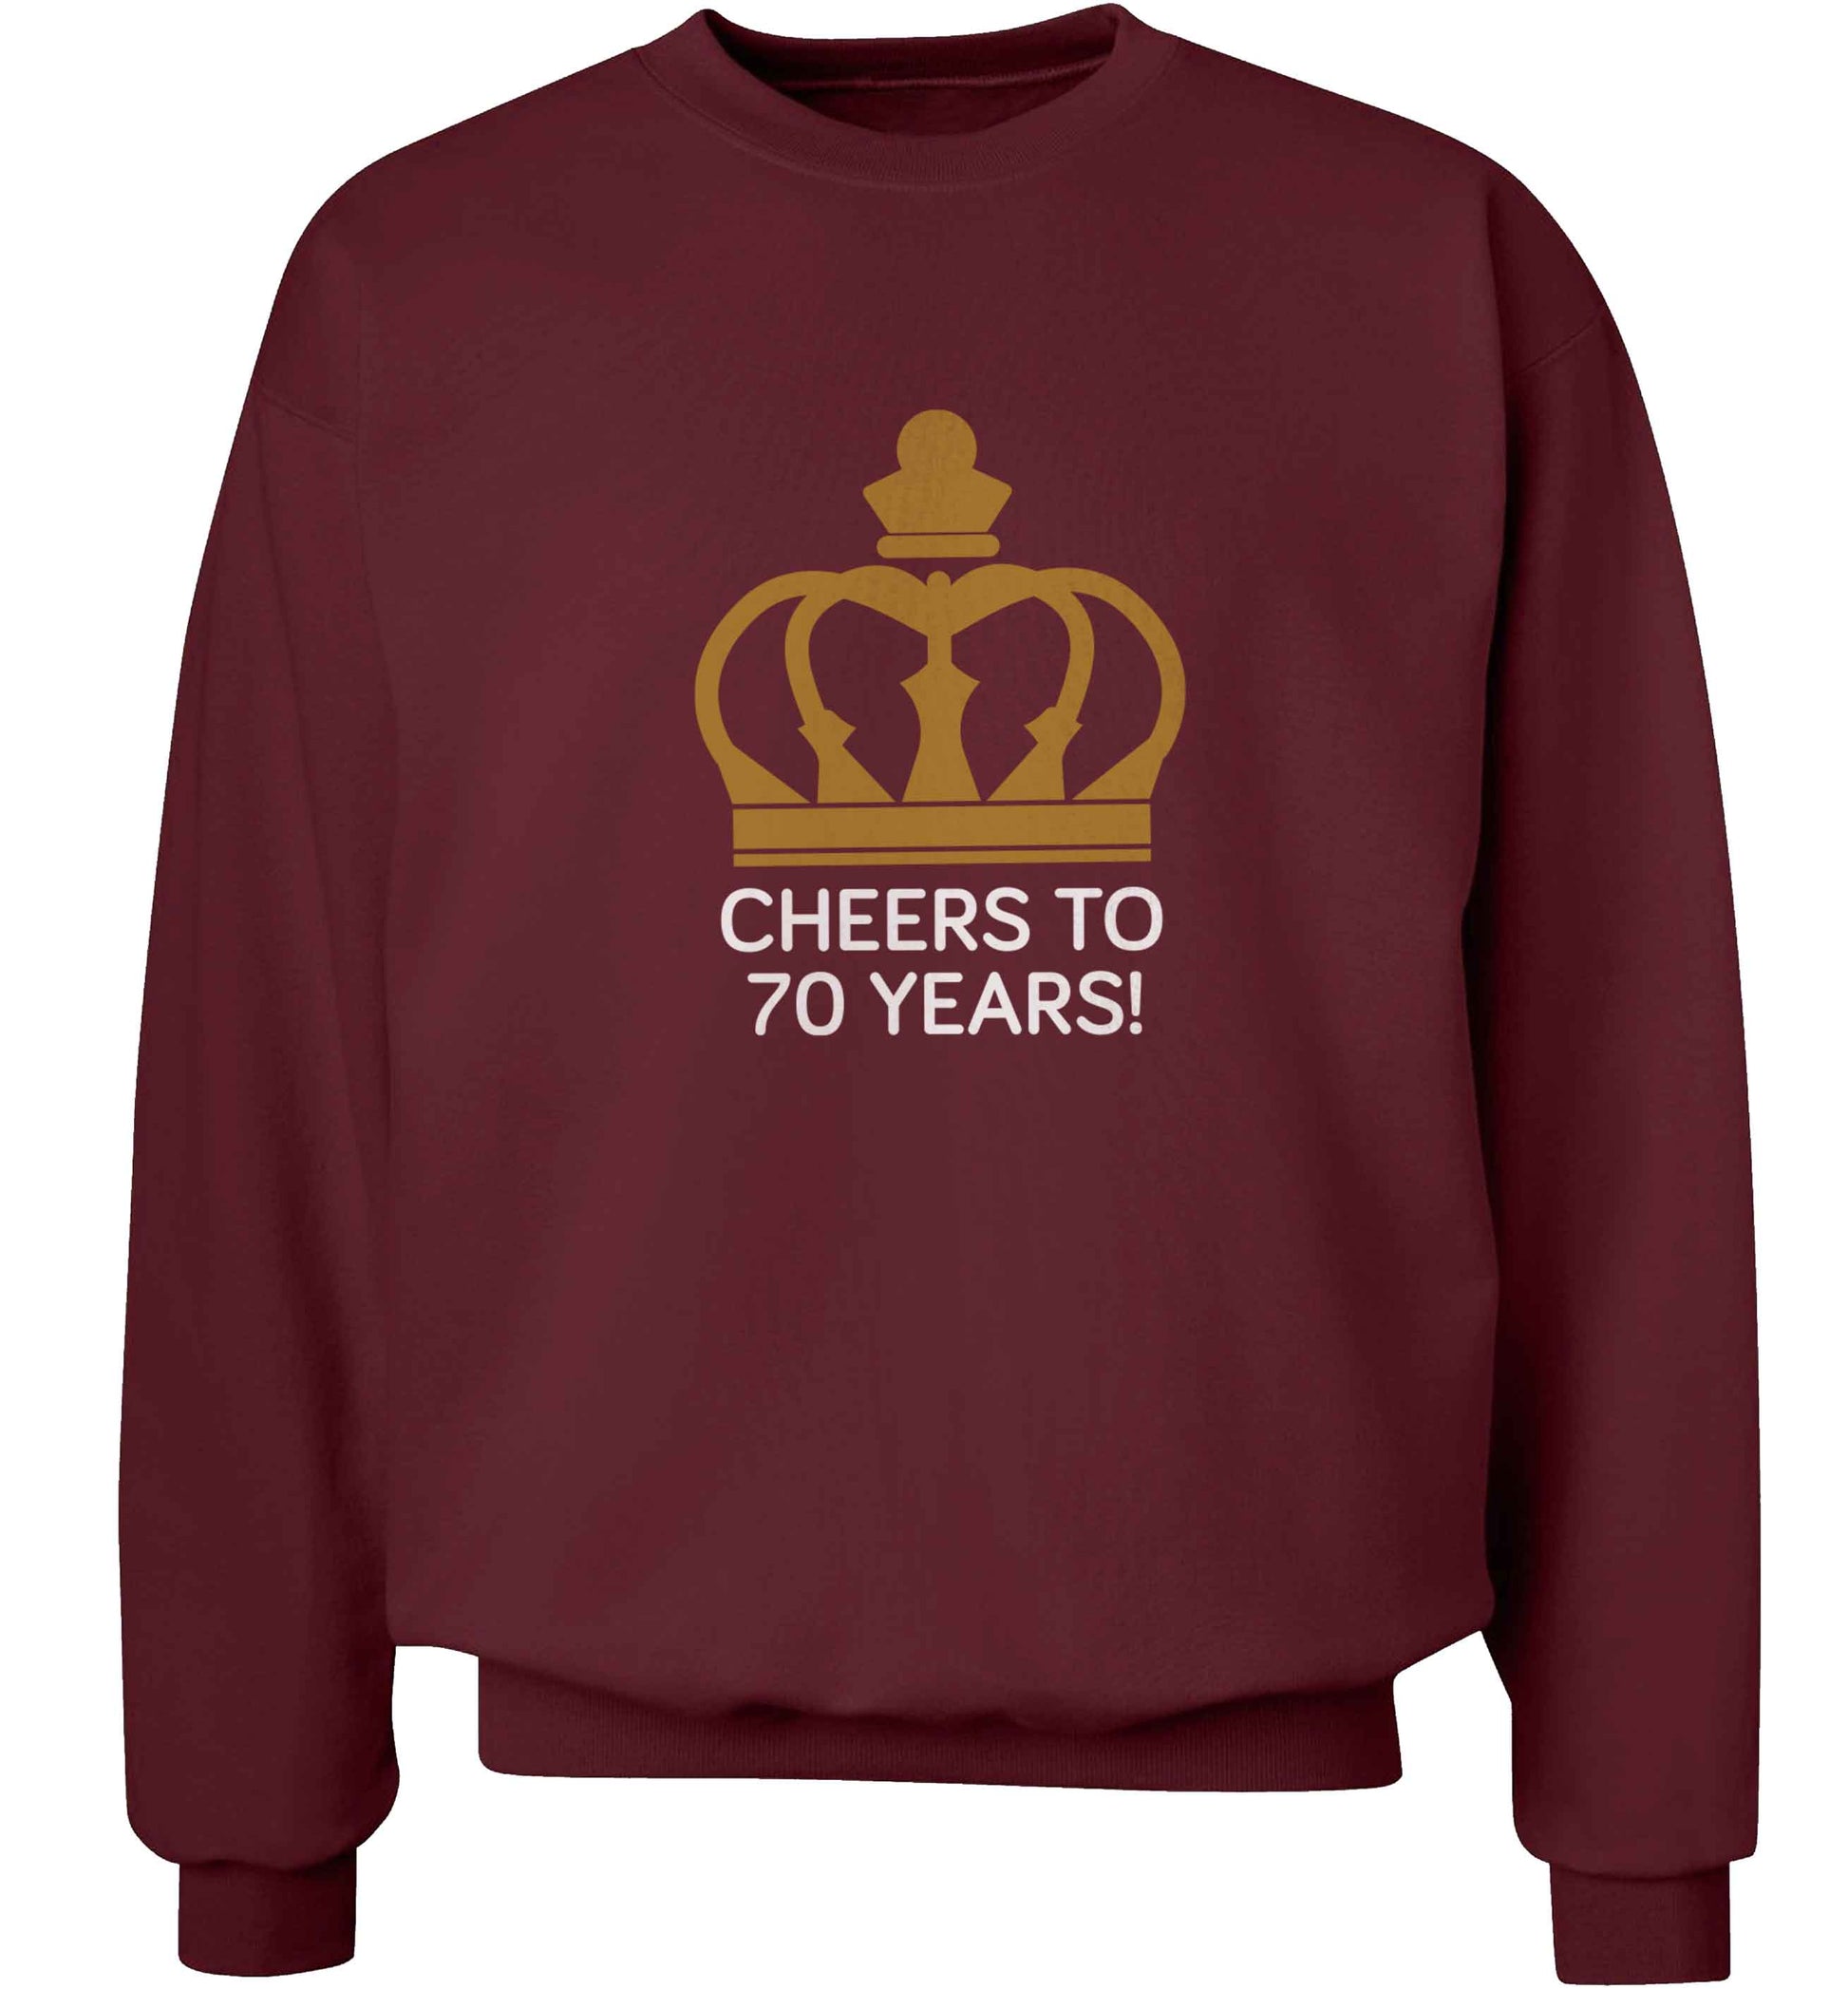 Cheers to 70 years! adult's unisex maroon sweater 2XL